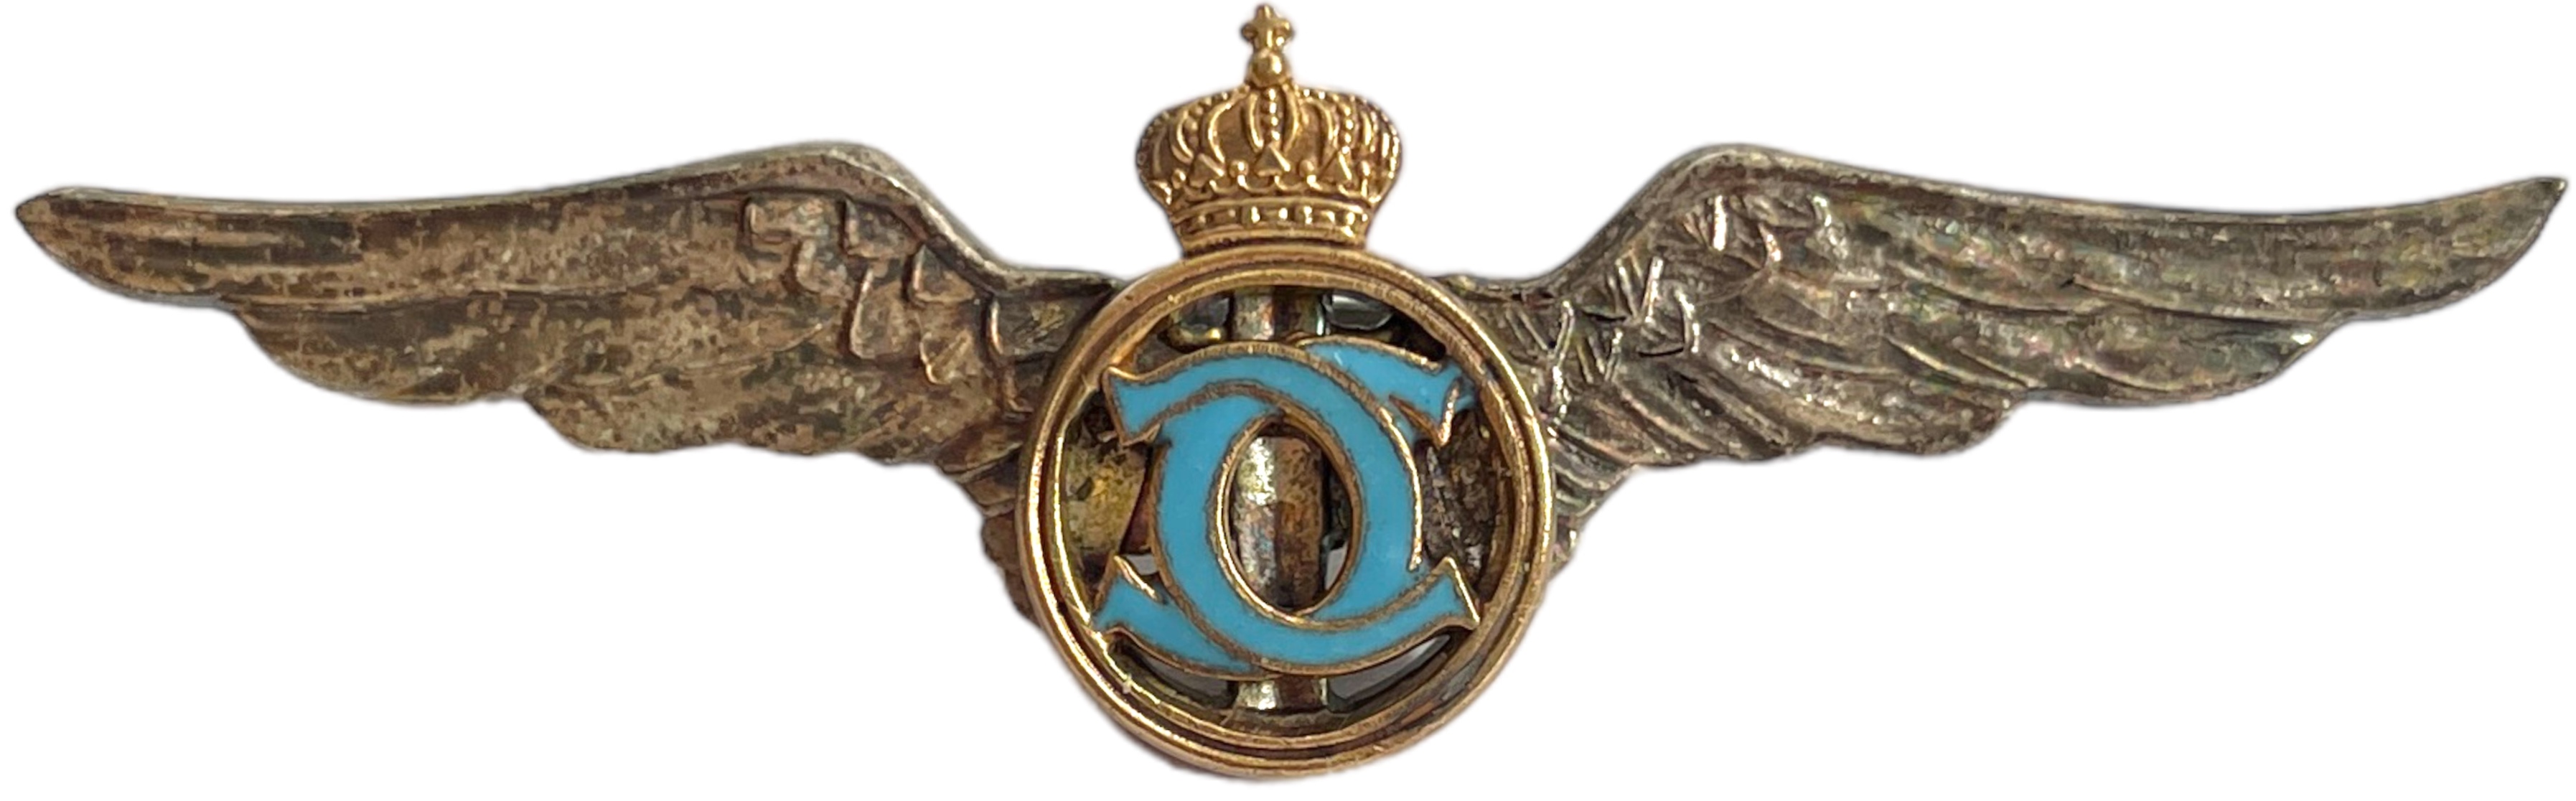 PILOT BADGE FOR GRADUATES OF THE "SPORT AND TOURISM "DEPARTMENT, KING CAROL II MODEL 1931-1940